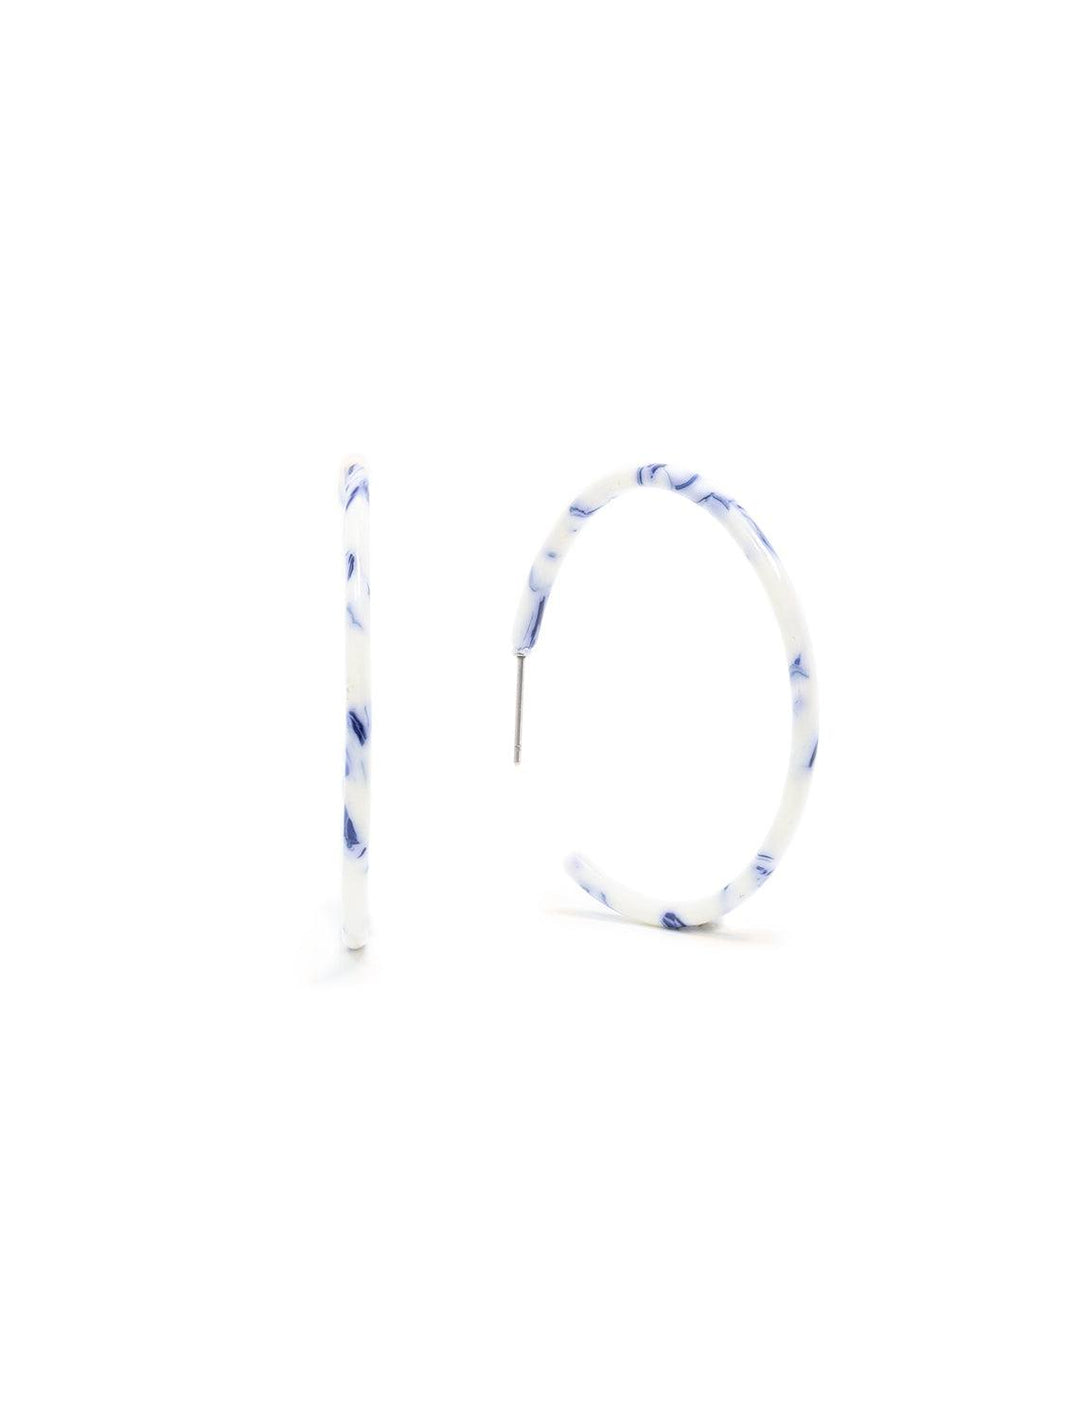 Front view of St. Armand's blue and white skinny hoops.